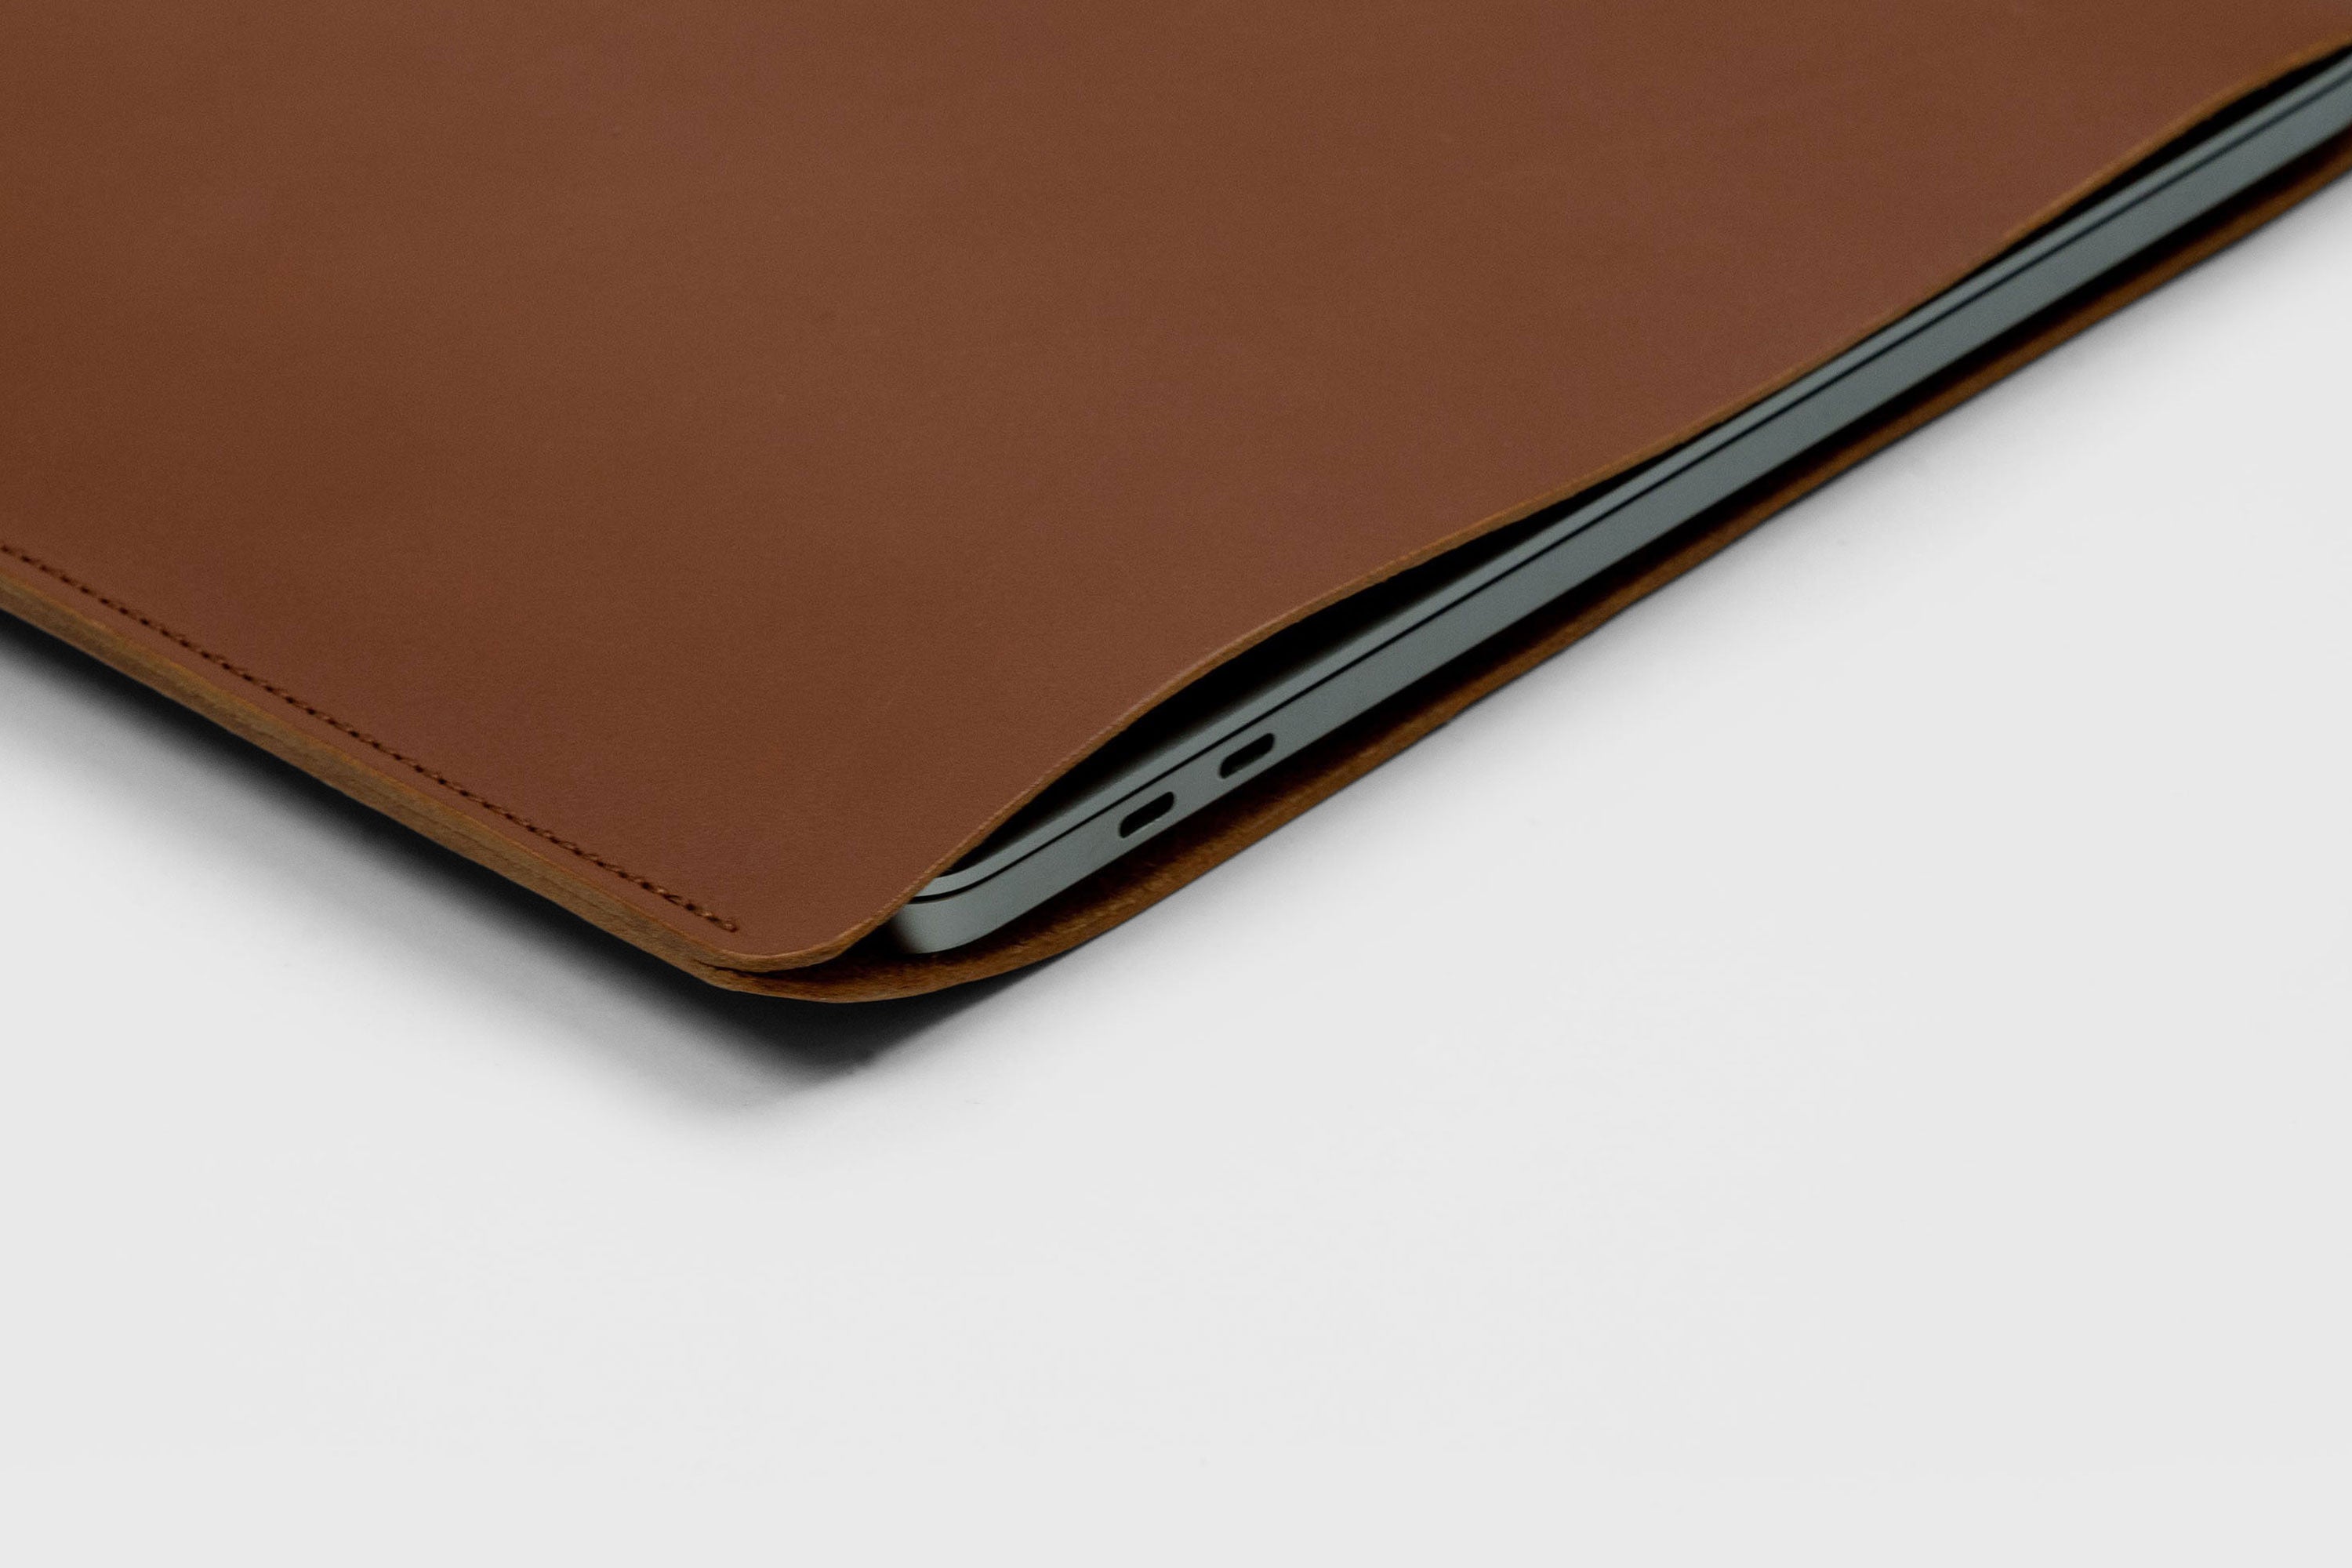 macbook leather sleeve protection